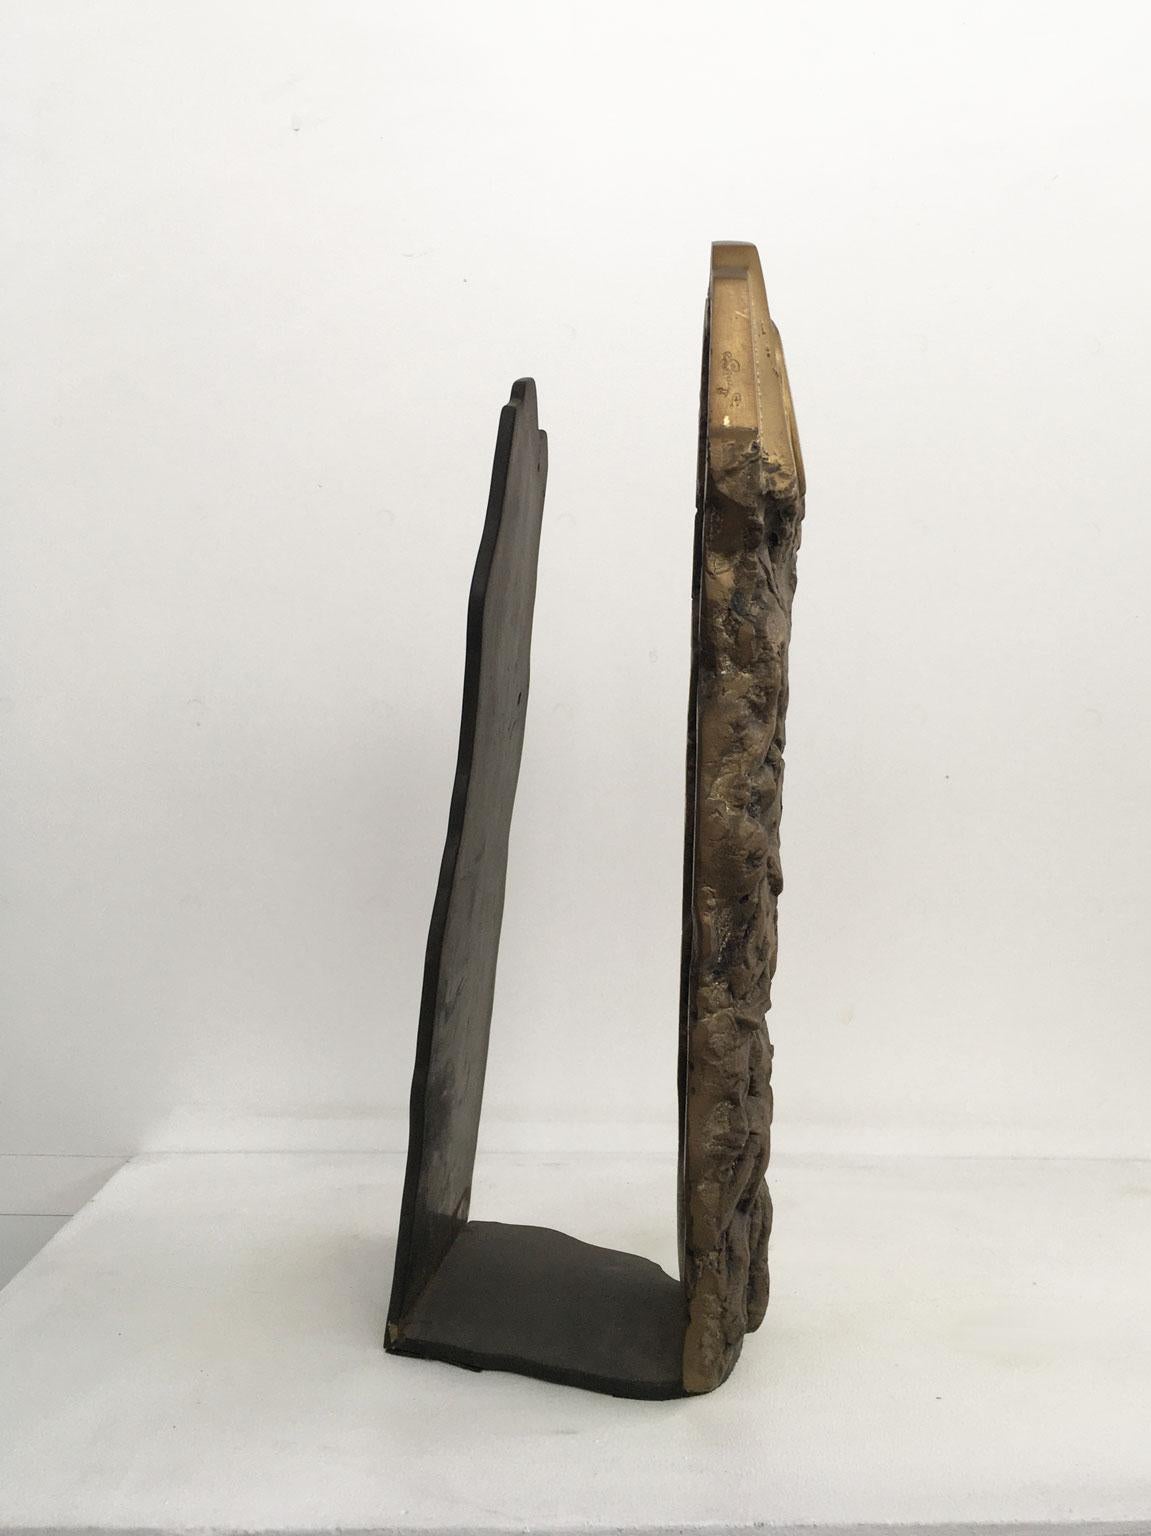 1979 Italy Post-Modern Graziano Pompili Abstract Bronze Sculpture For Sale 3